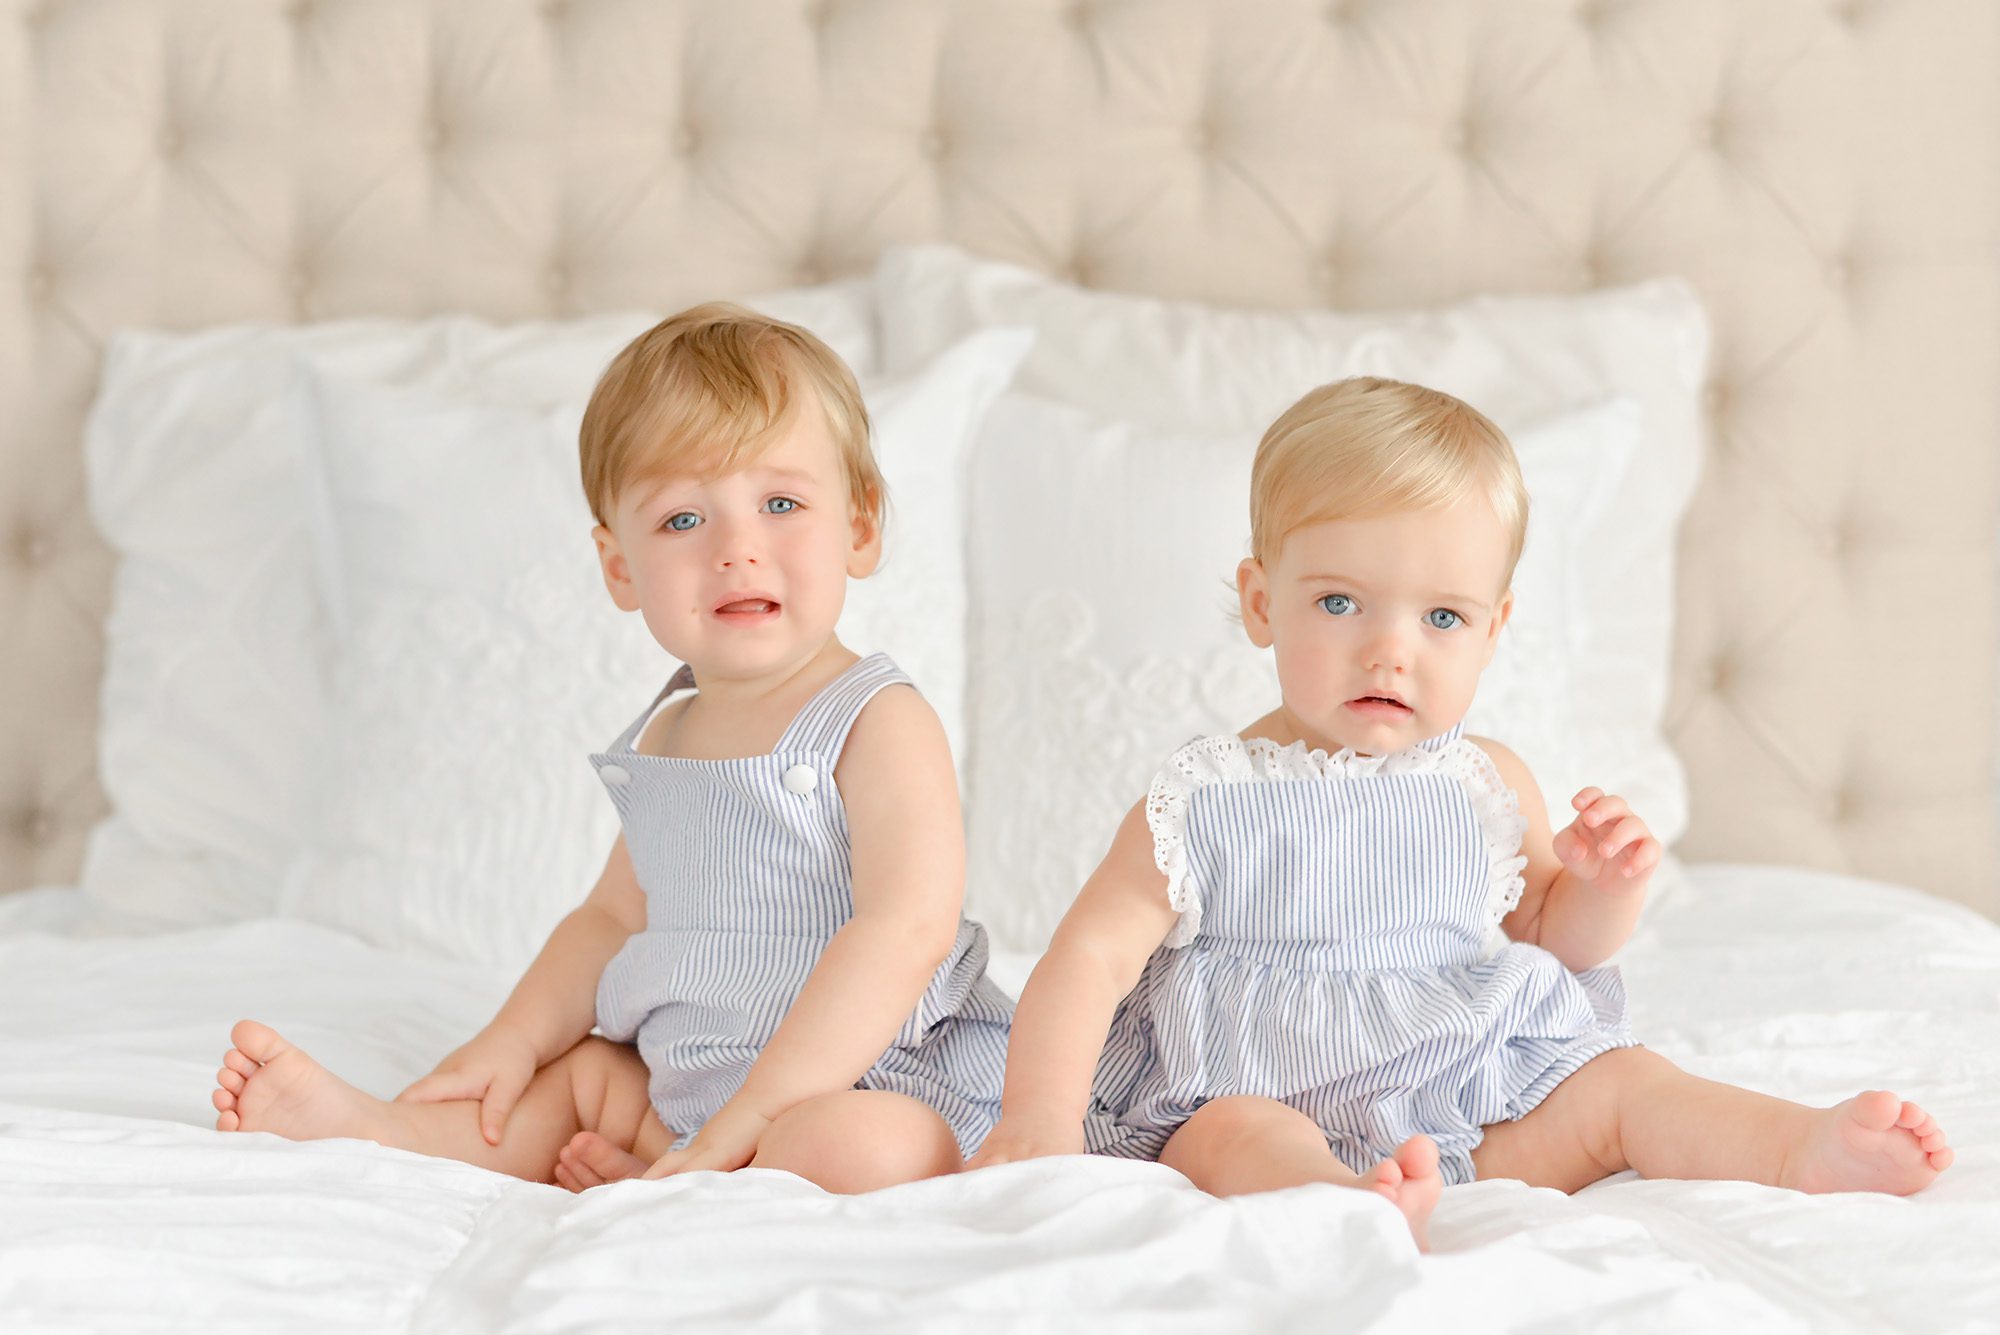 A set of blond haired blue eyed twins, one boy and one girl are being photographed in a white studio for their 1st birthday, which includes portraits and a cake smash at the end.